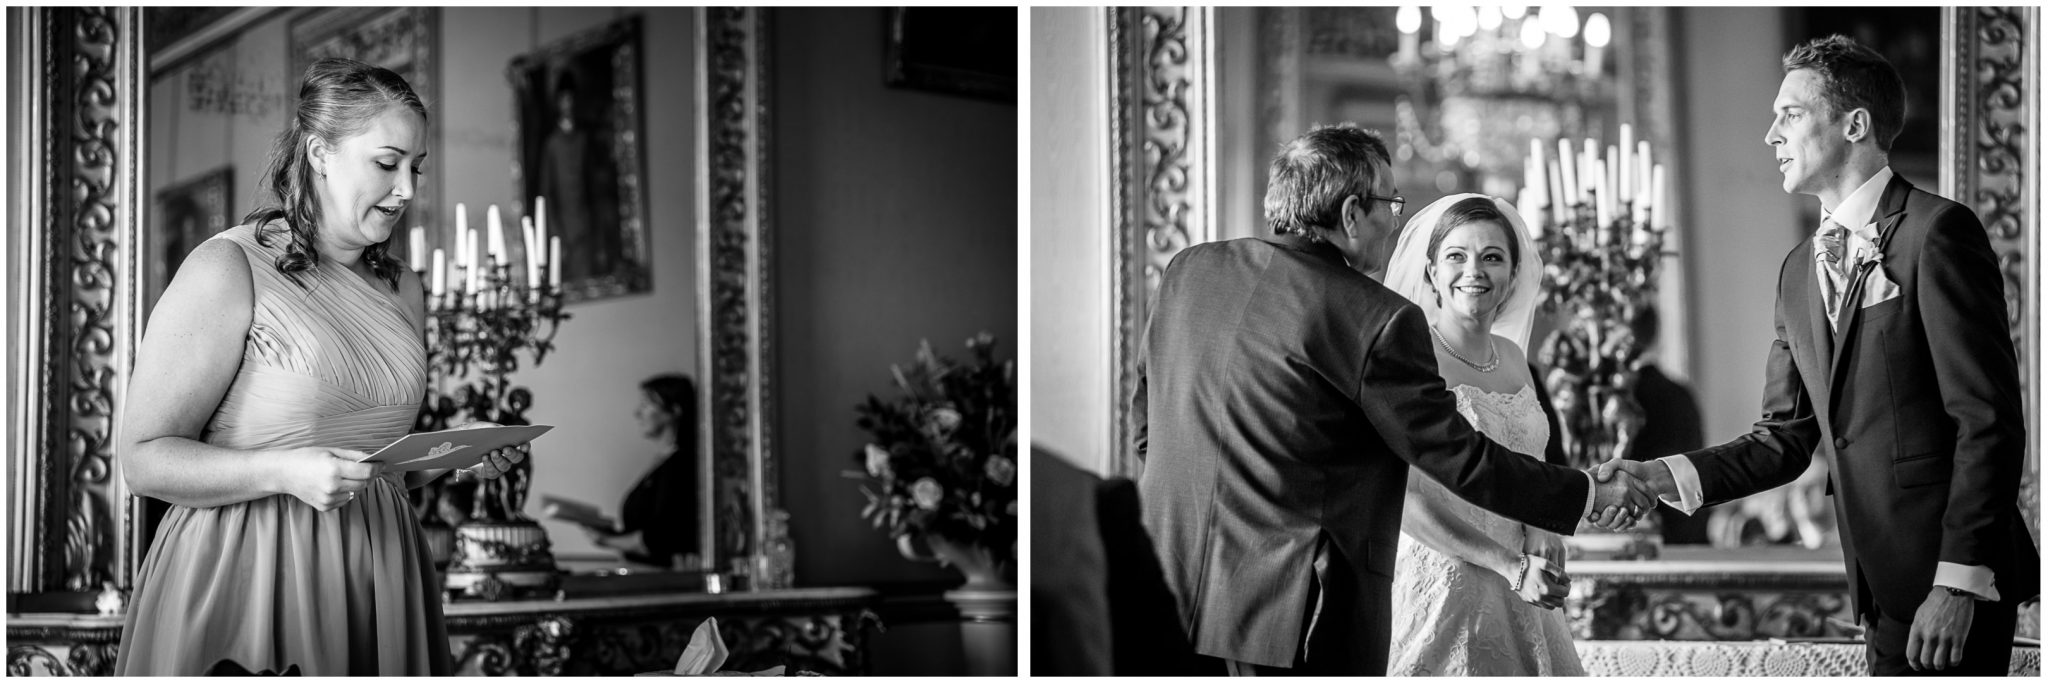 Avington Park wedding photography readings during the marriage ceremony